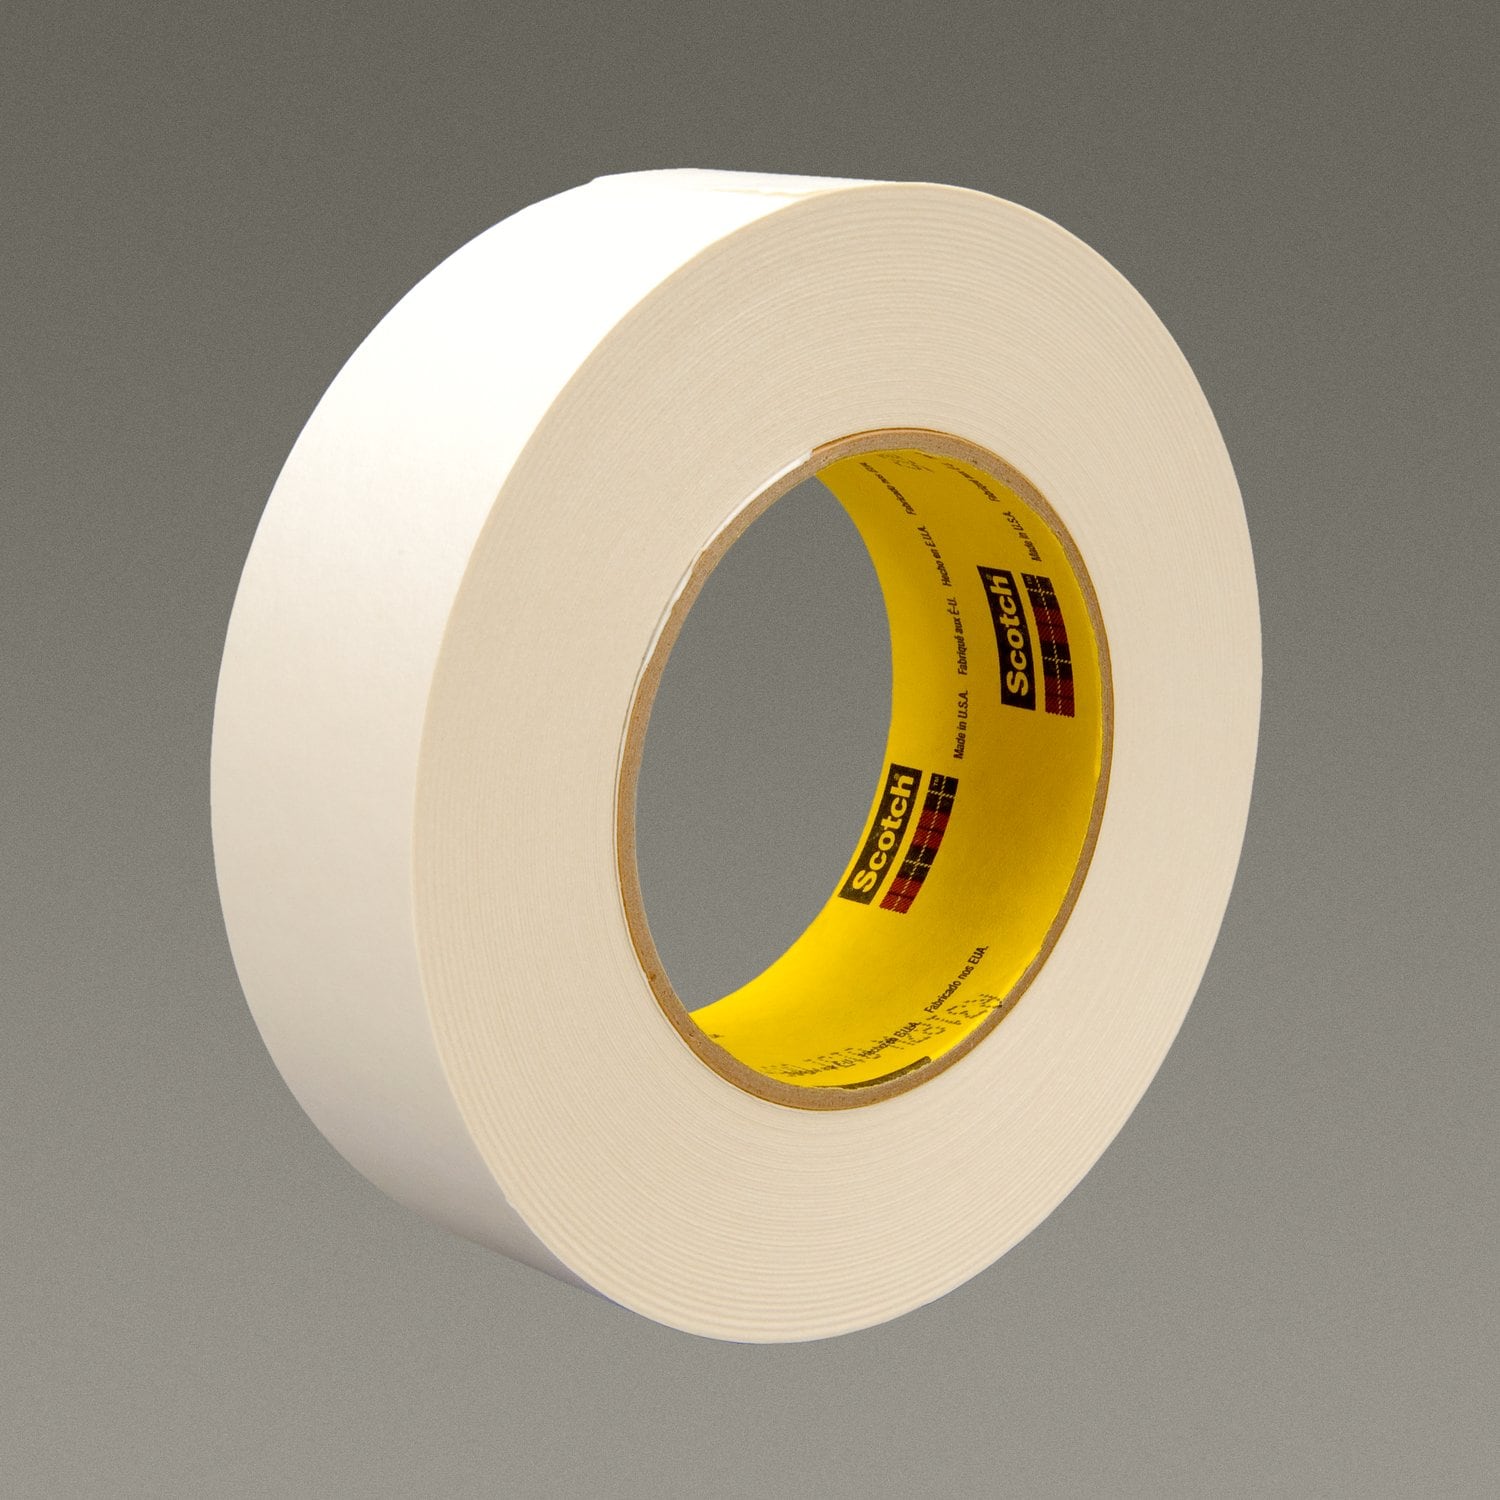 7100028048 - 3M Repulpable Strong Single Coated Tape R3187, White, 24 mm x 55 m, 7.5
mil, 36 rolls per case